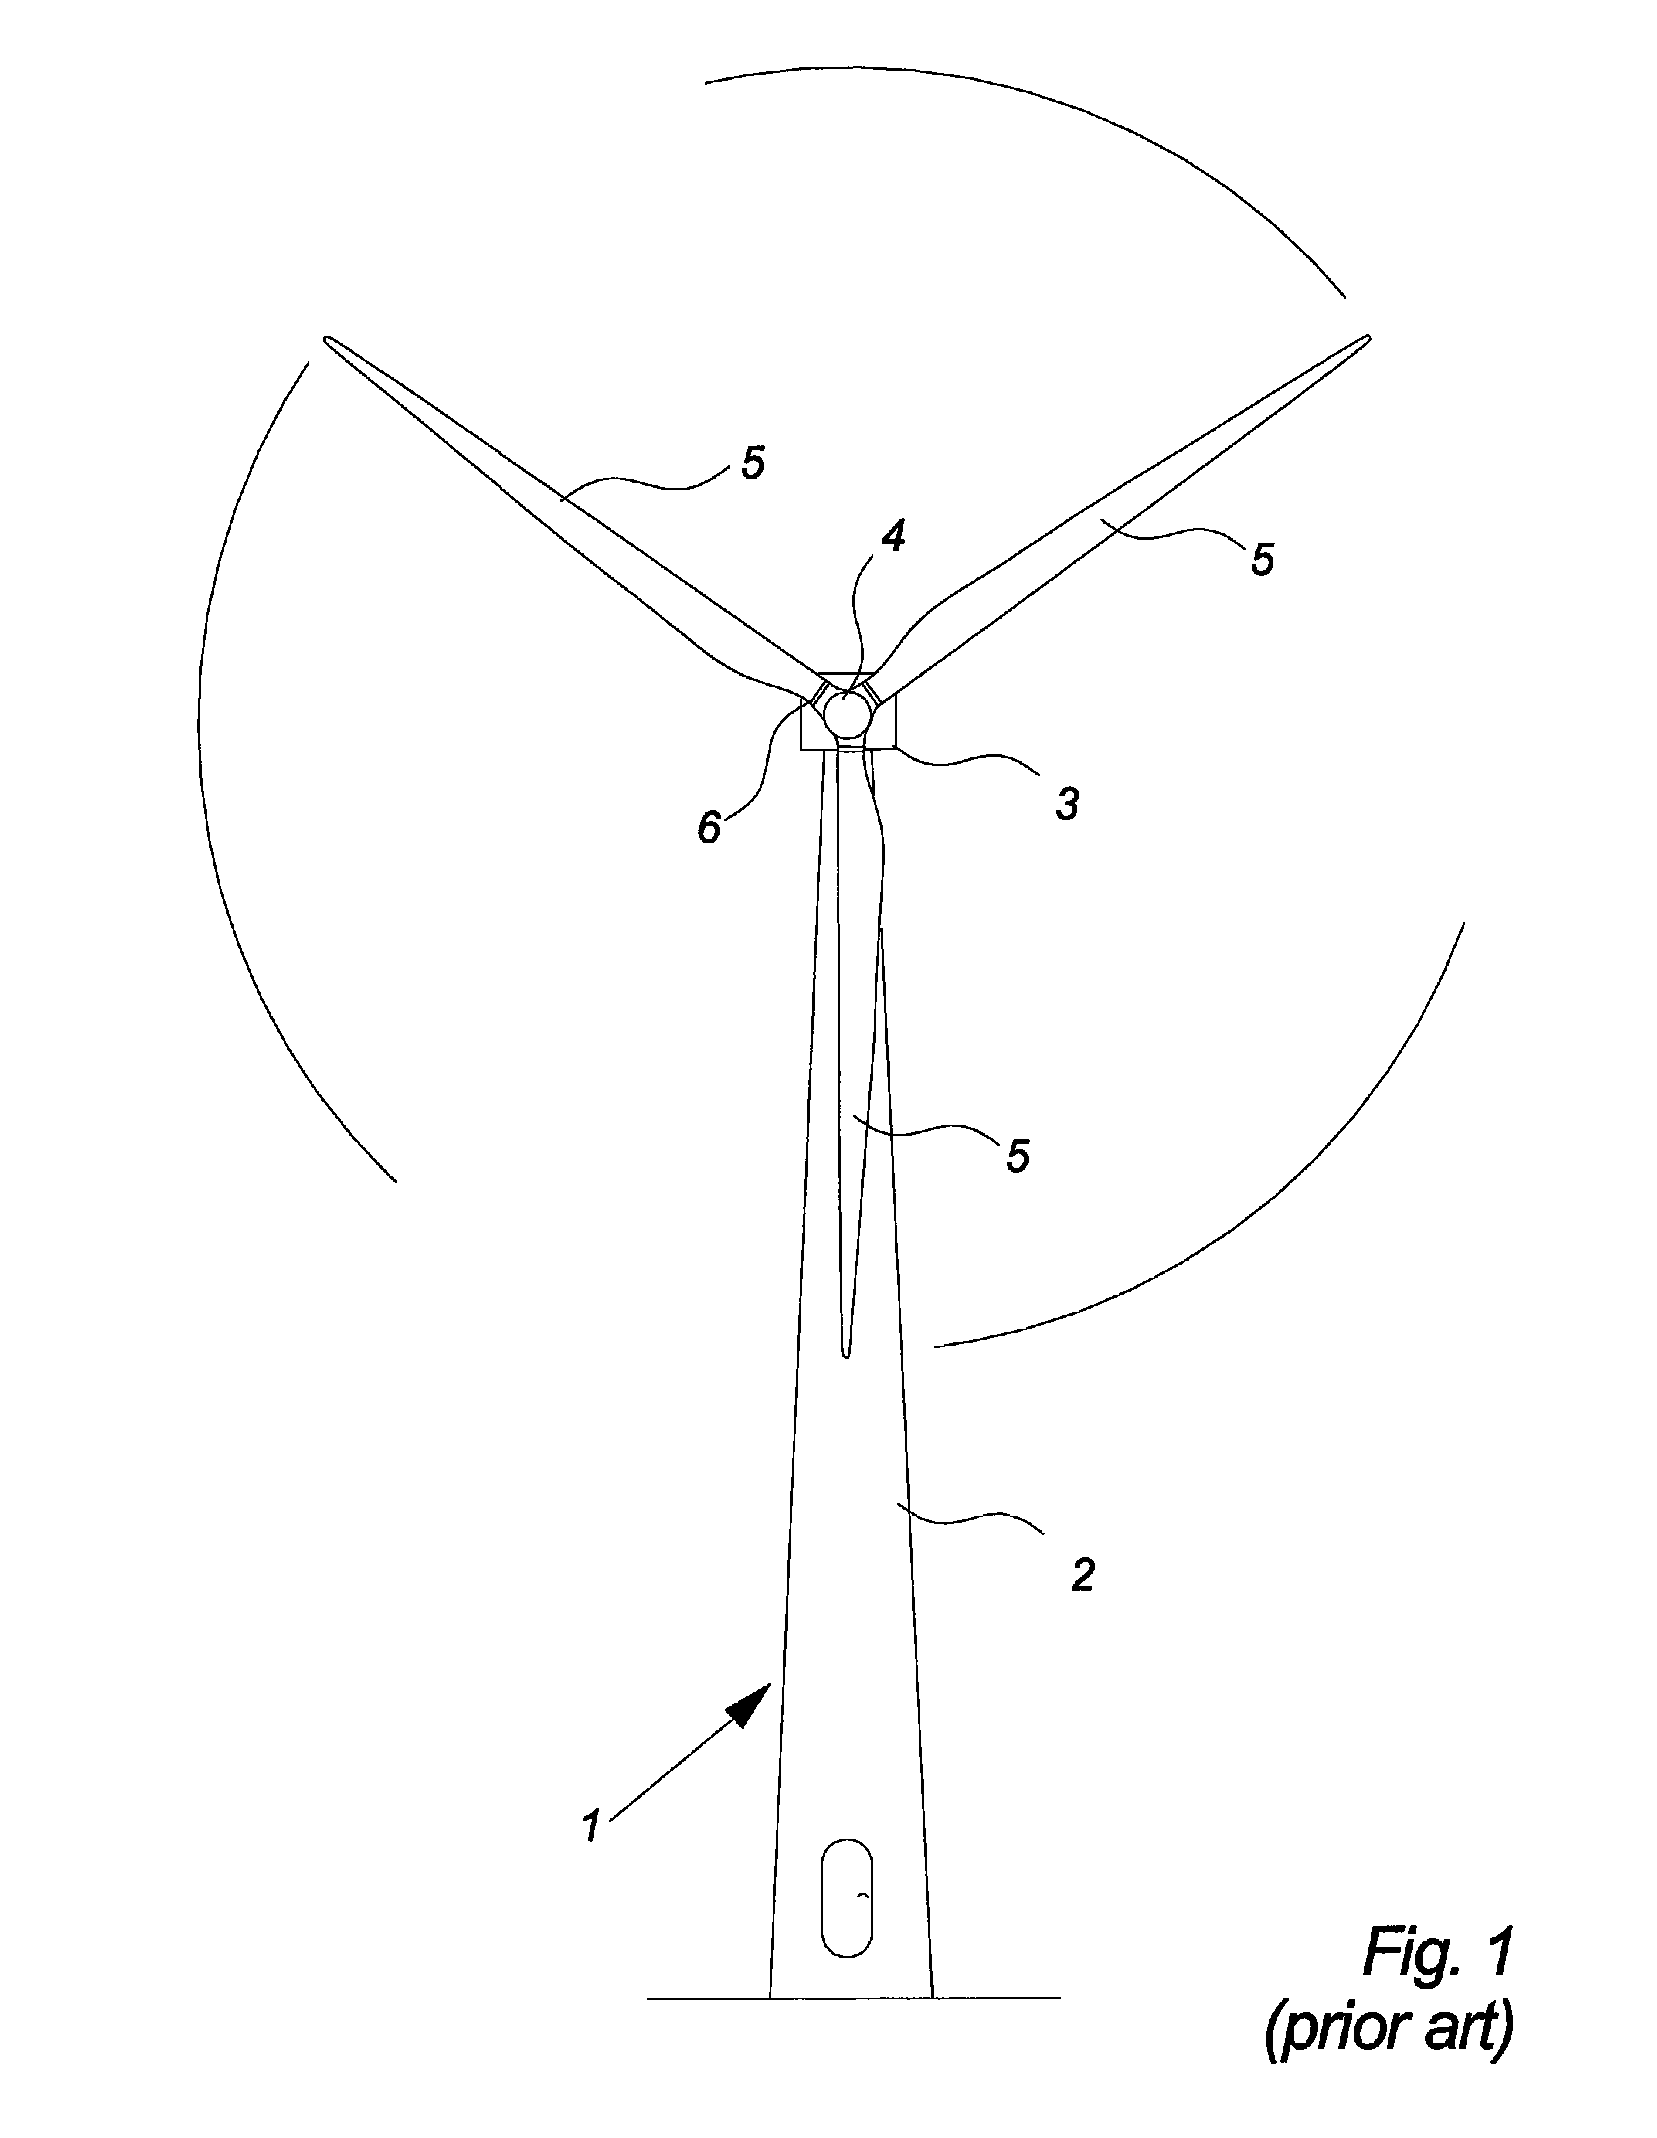 Method of operating a wind turbine with pitch control, a wind turbine and a cluster of wind turbines